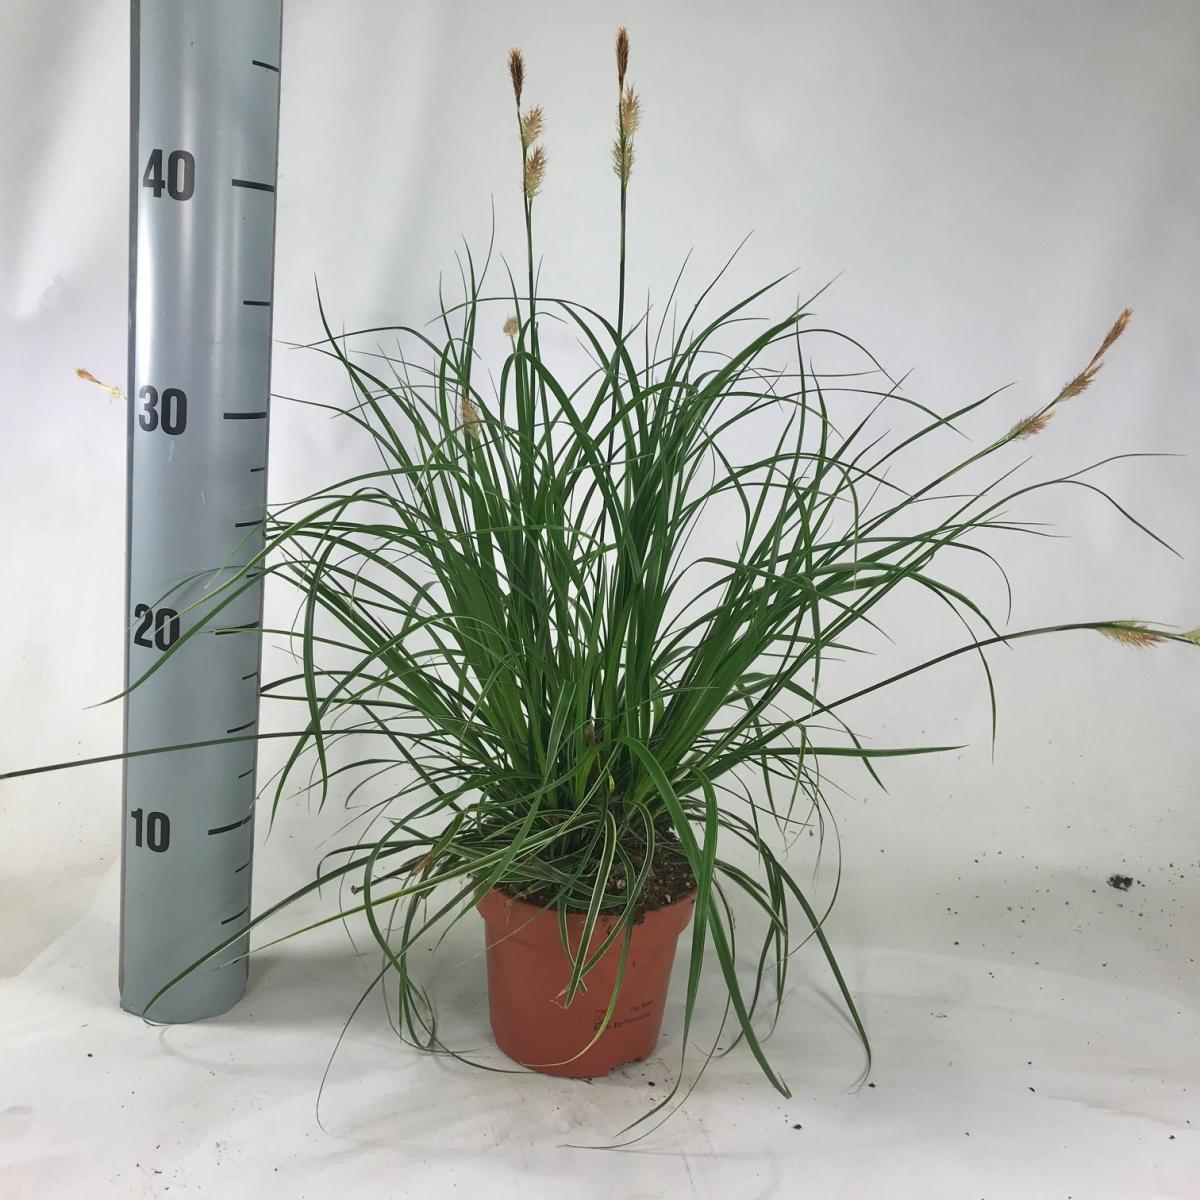 Carex morrowii 'Fisher's Form'